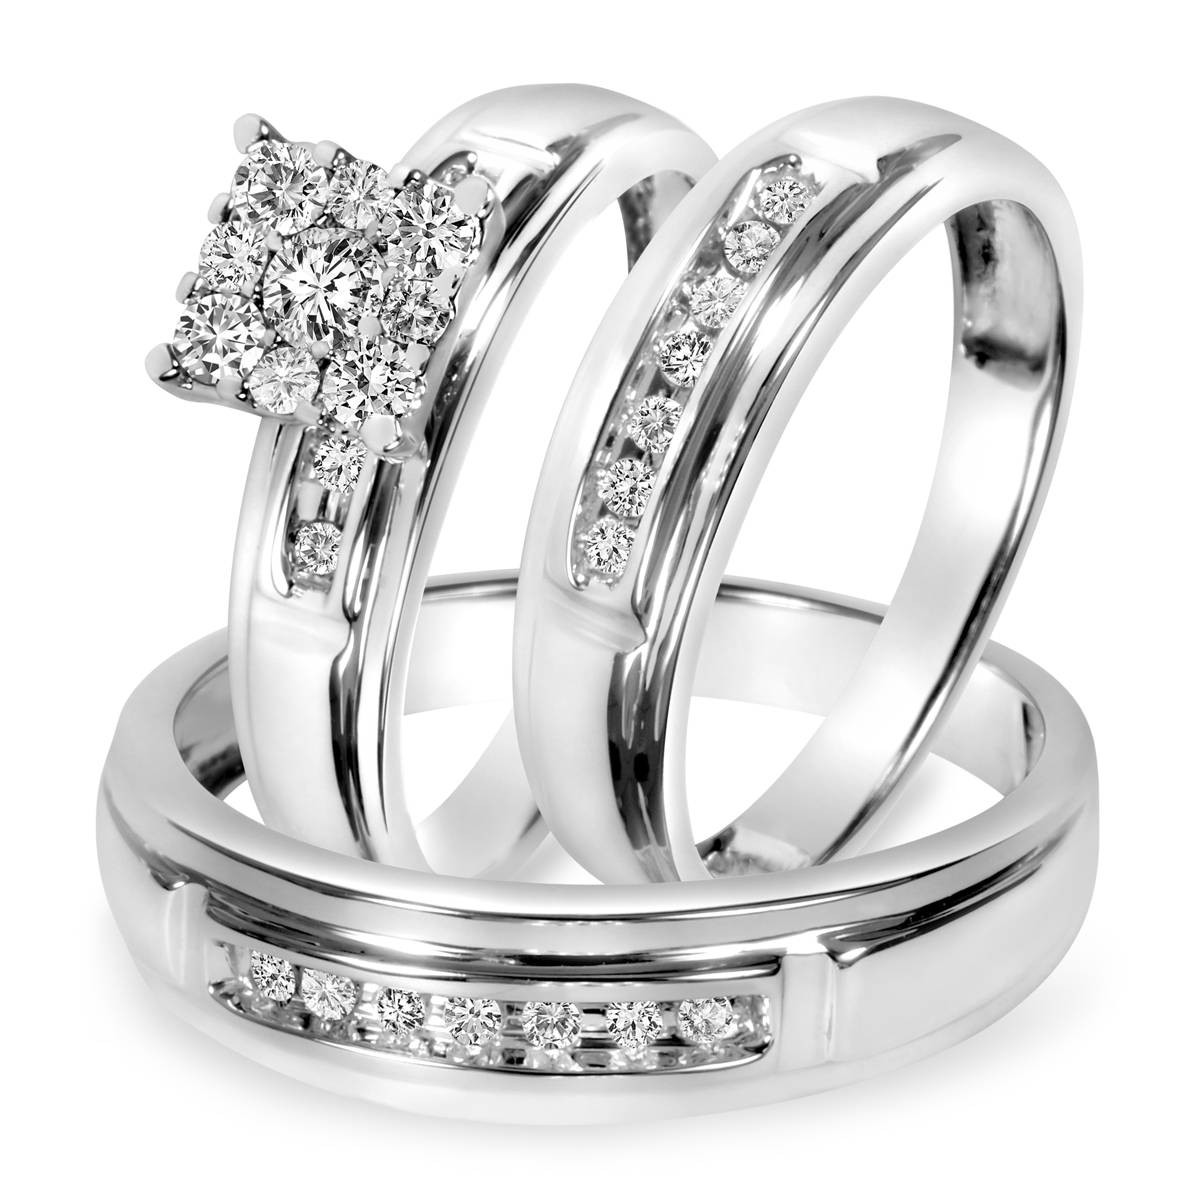 Cheap Trio Wedding Ring Sets
 15 Inspirations of Cheap Wedding Bands Sets His And Hers